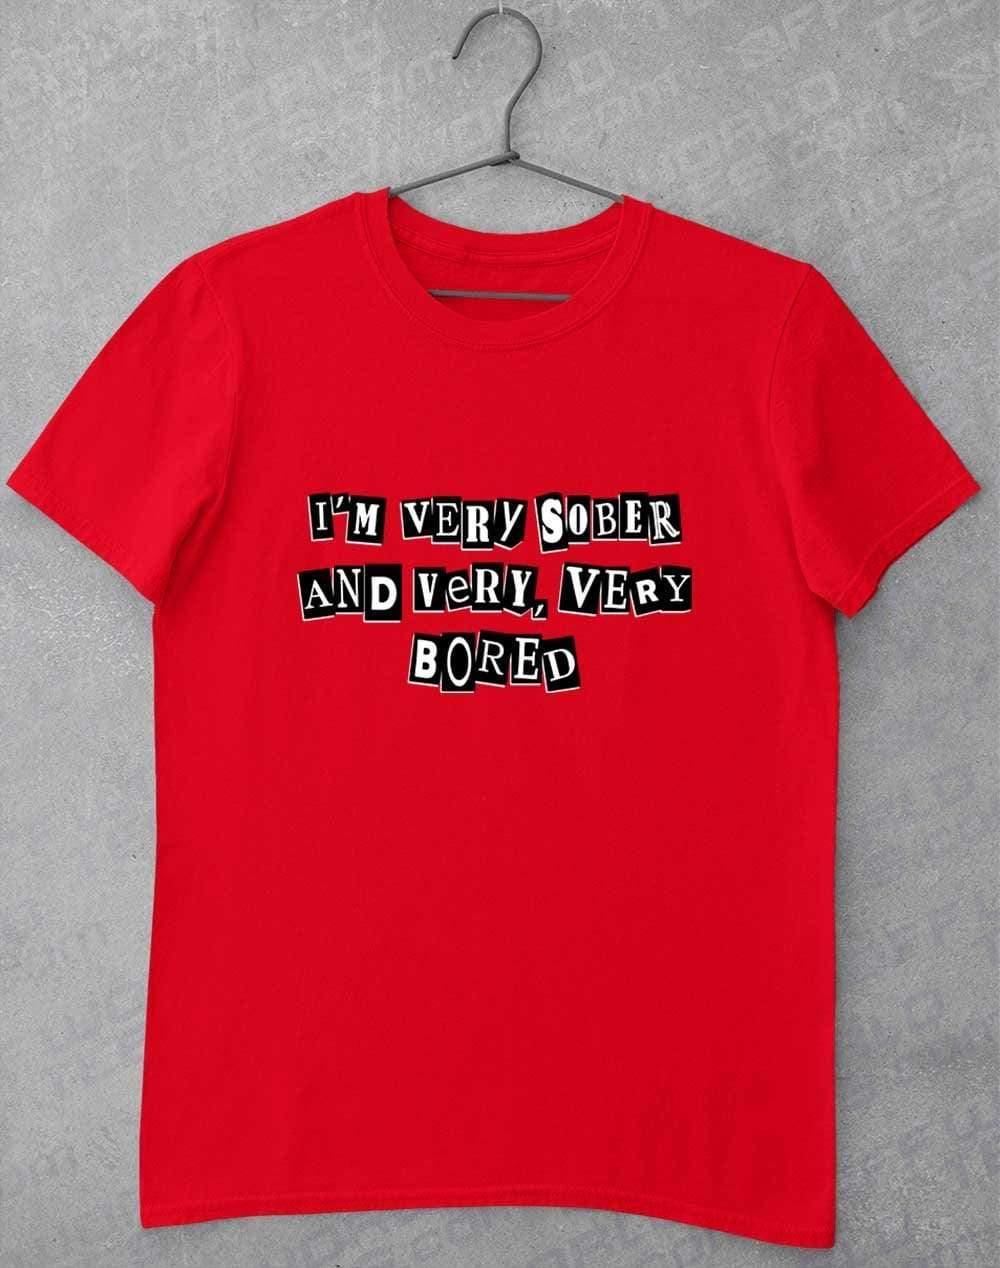 I'm Very Sober and Very Very Bored T-Shirt S / Red  - Off World Tees